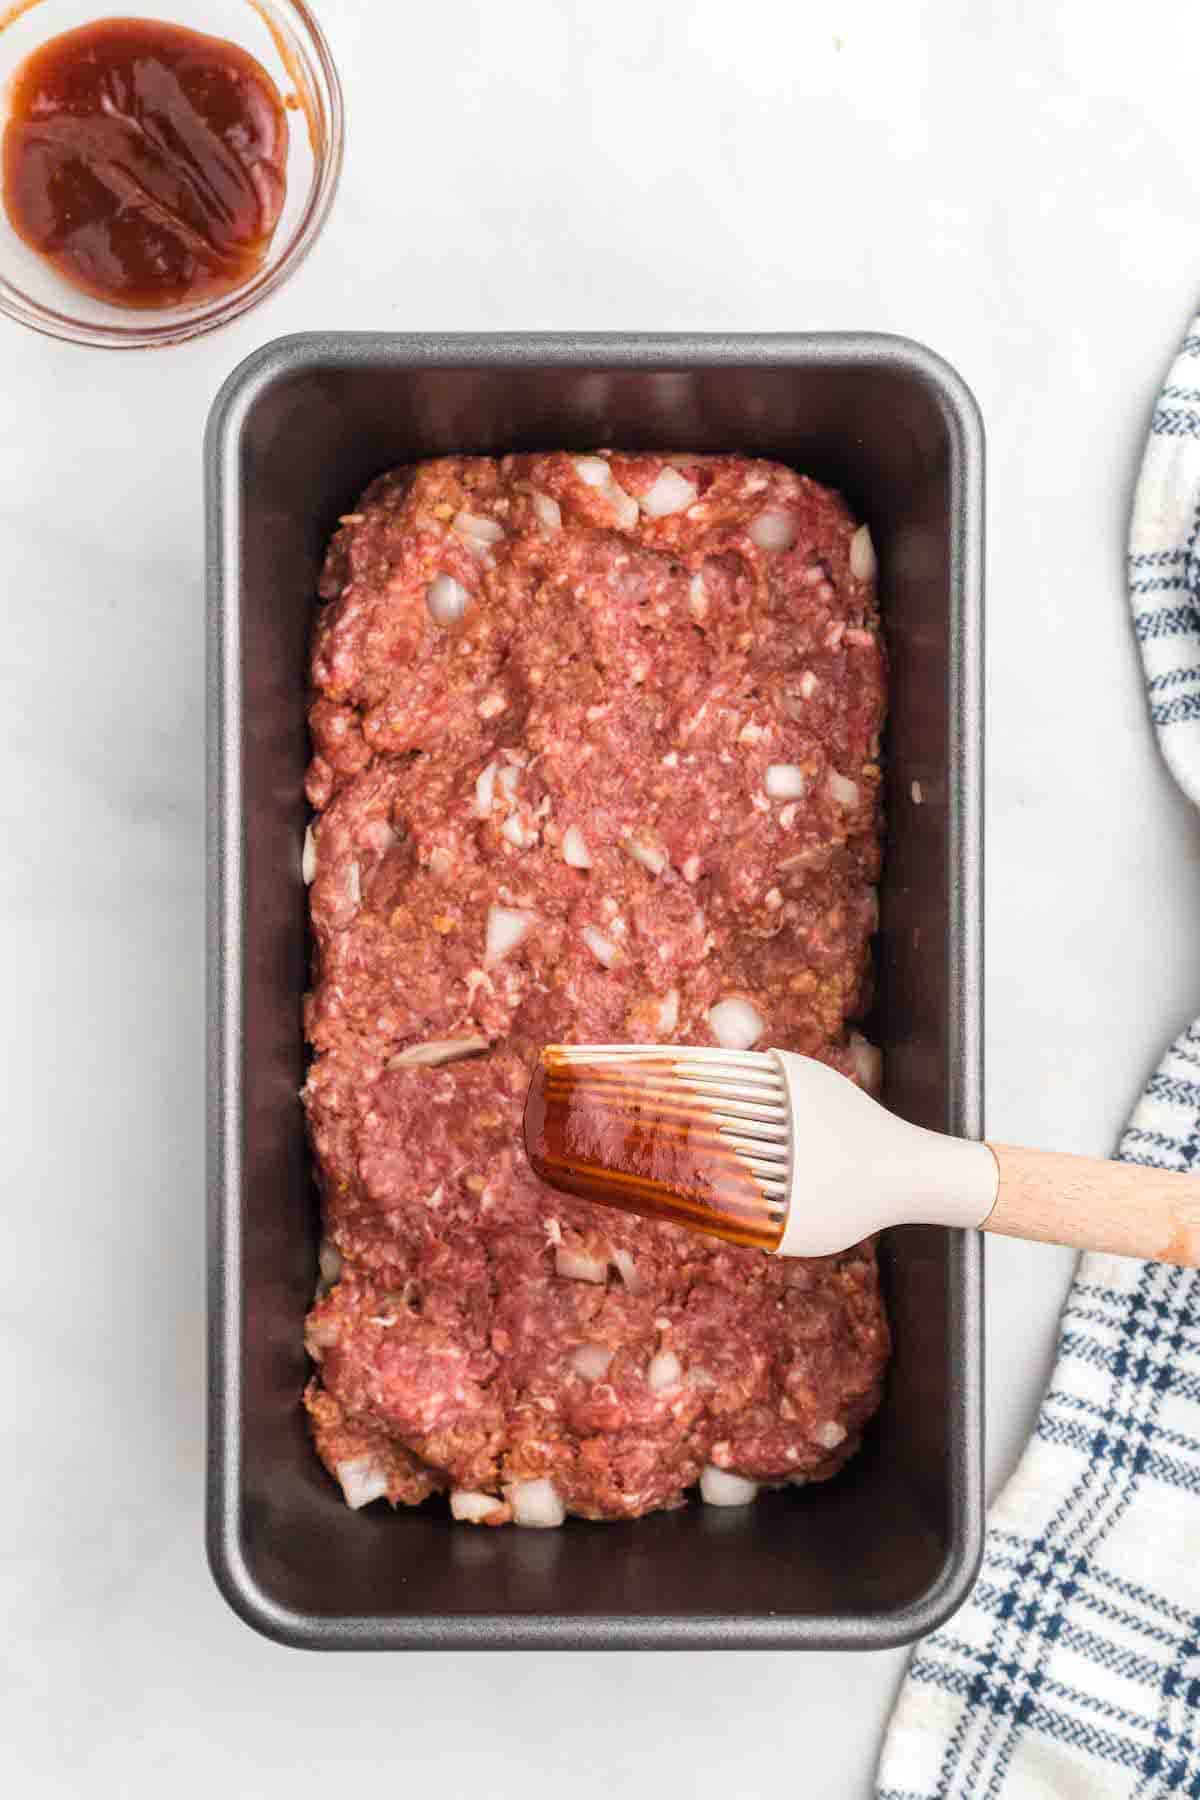 brushing the meat loaf bread with a little bbq sauce